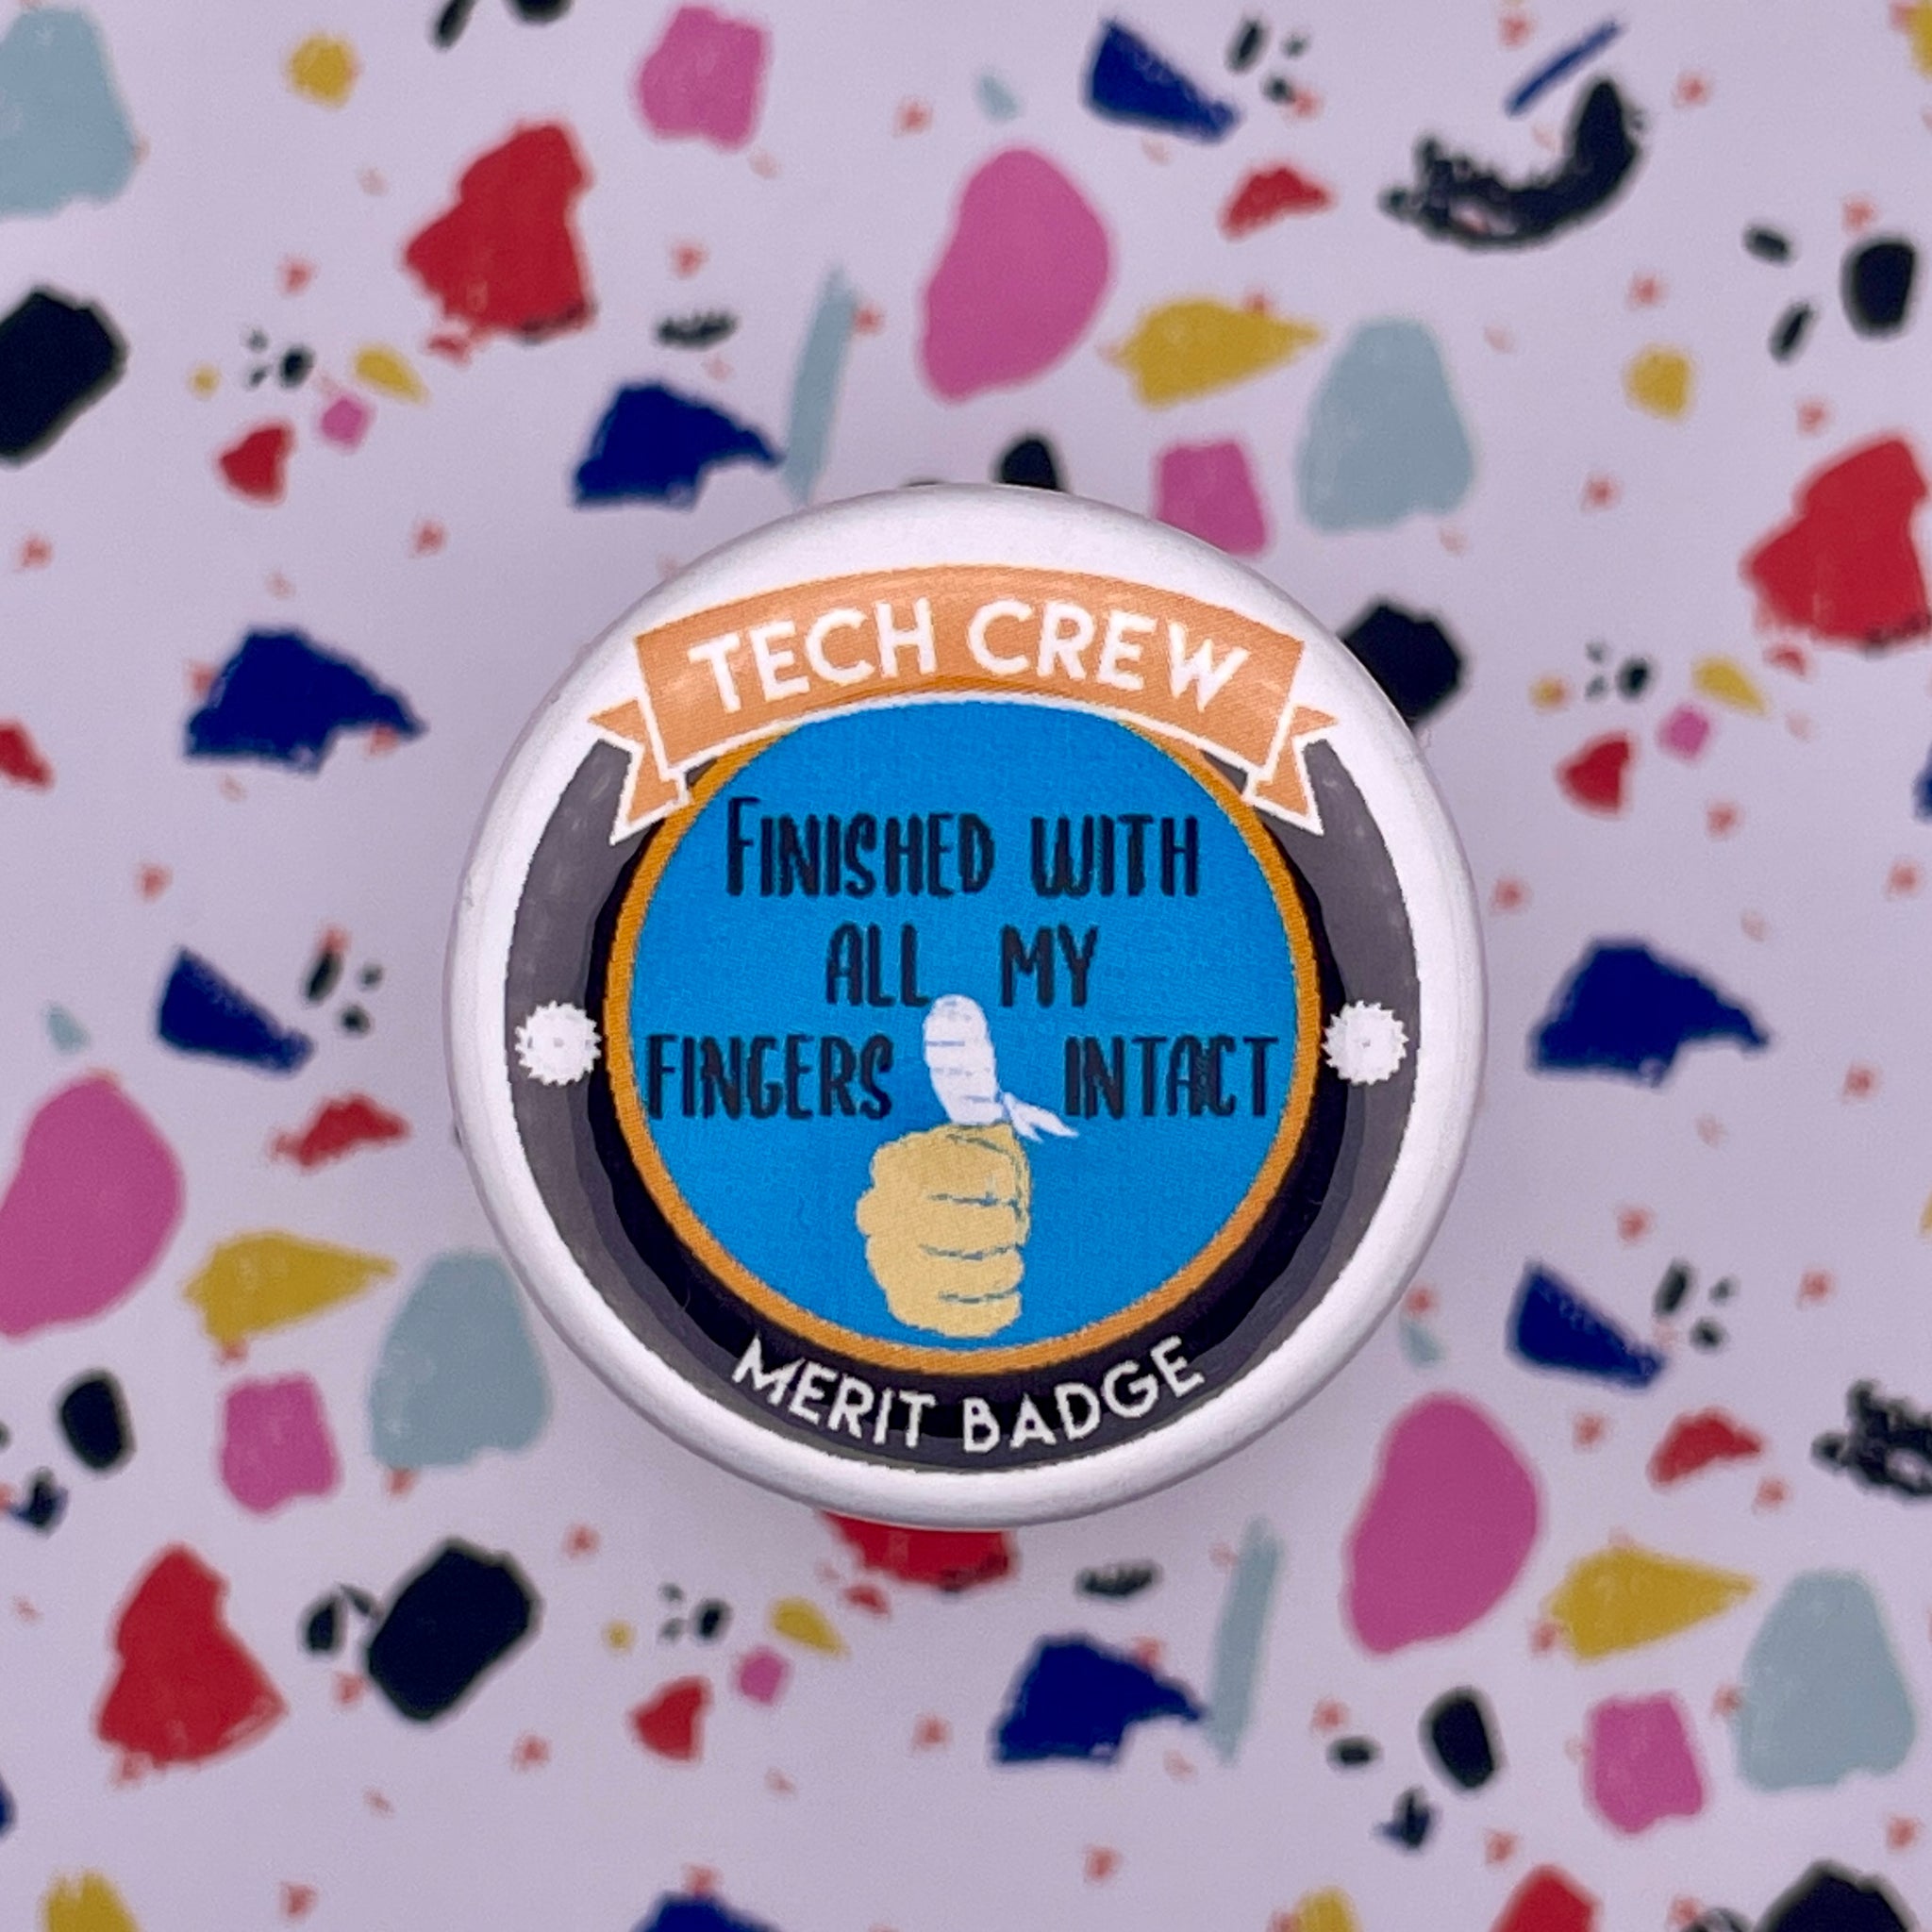 Finished Intact Tech Crew Merit Badge, 1-1/2" Button